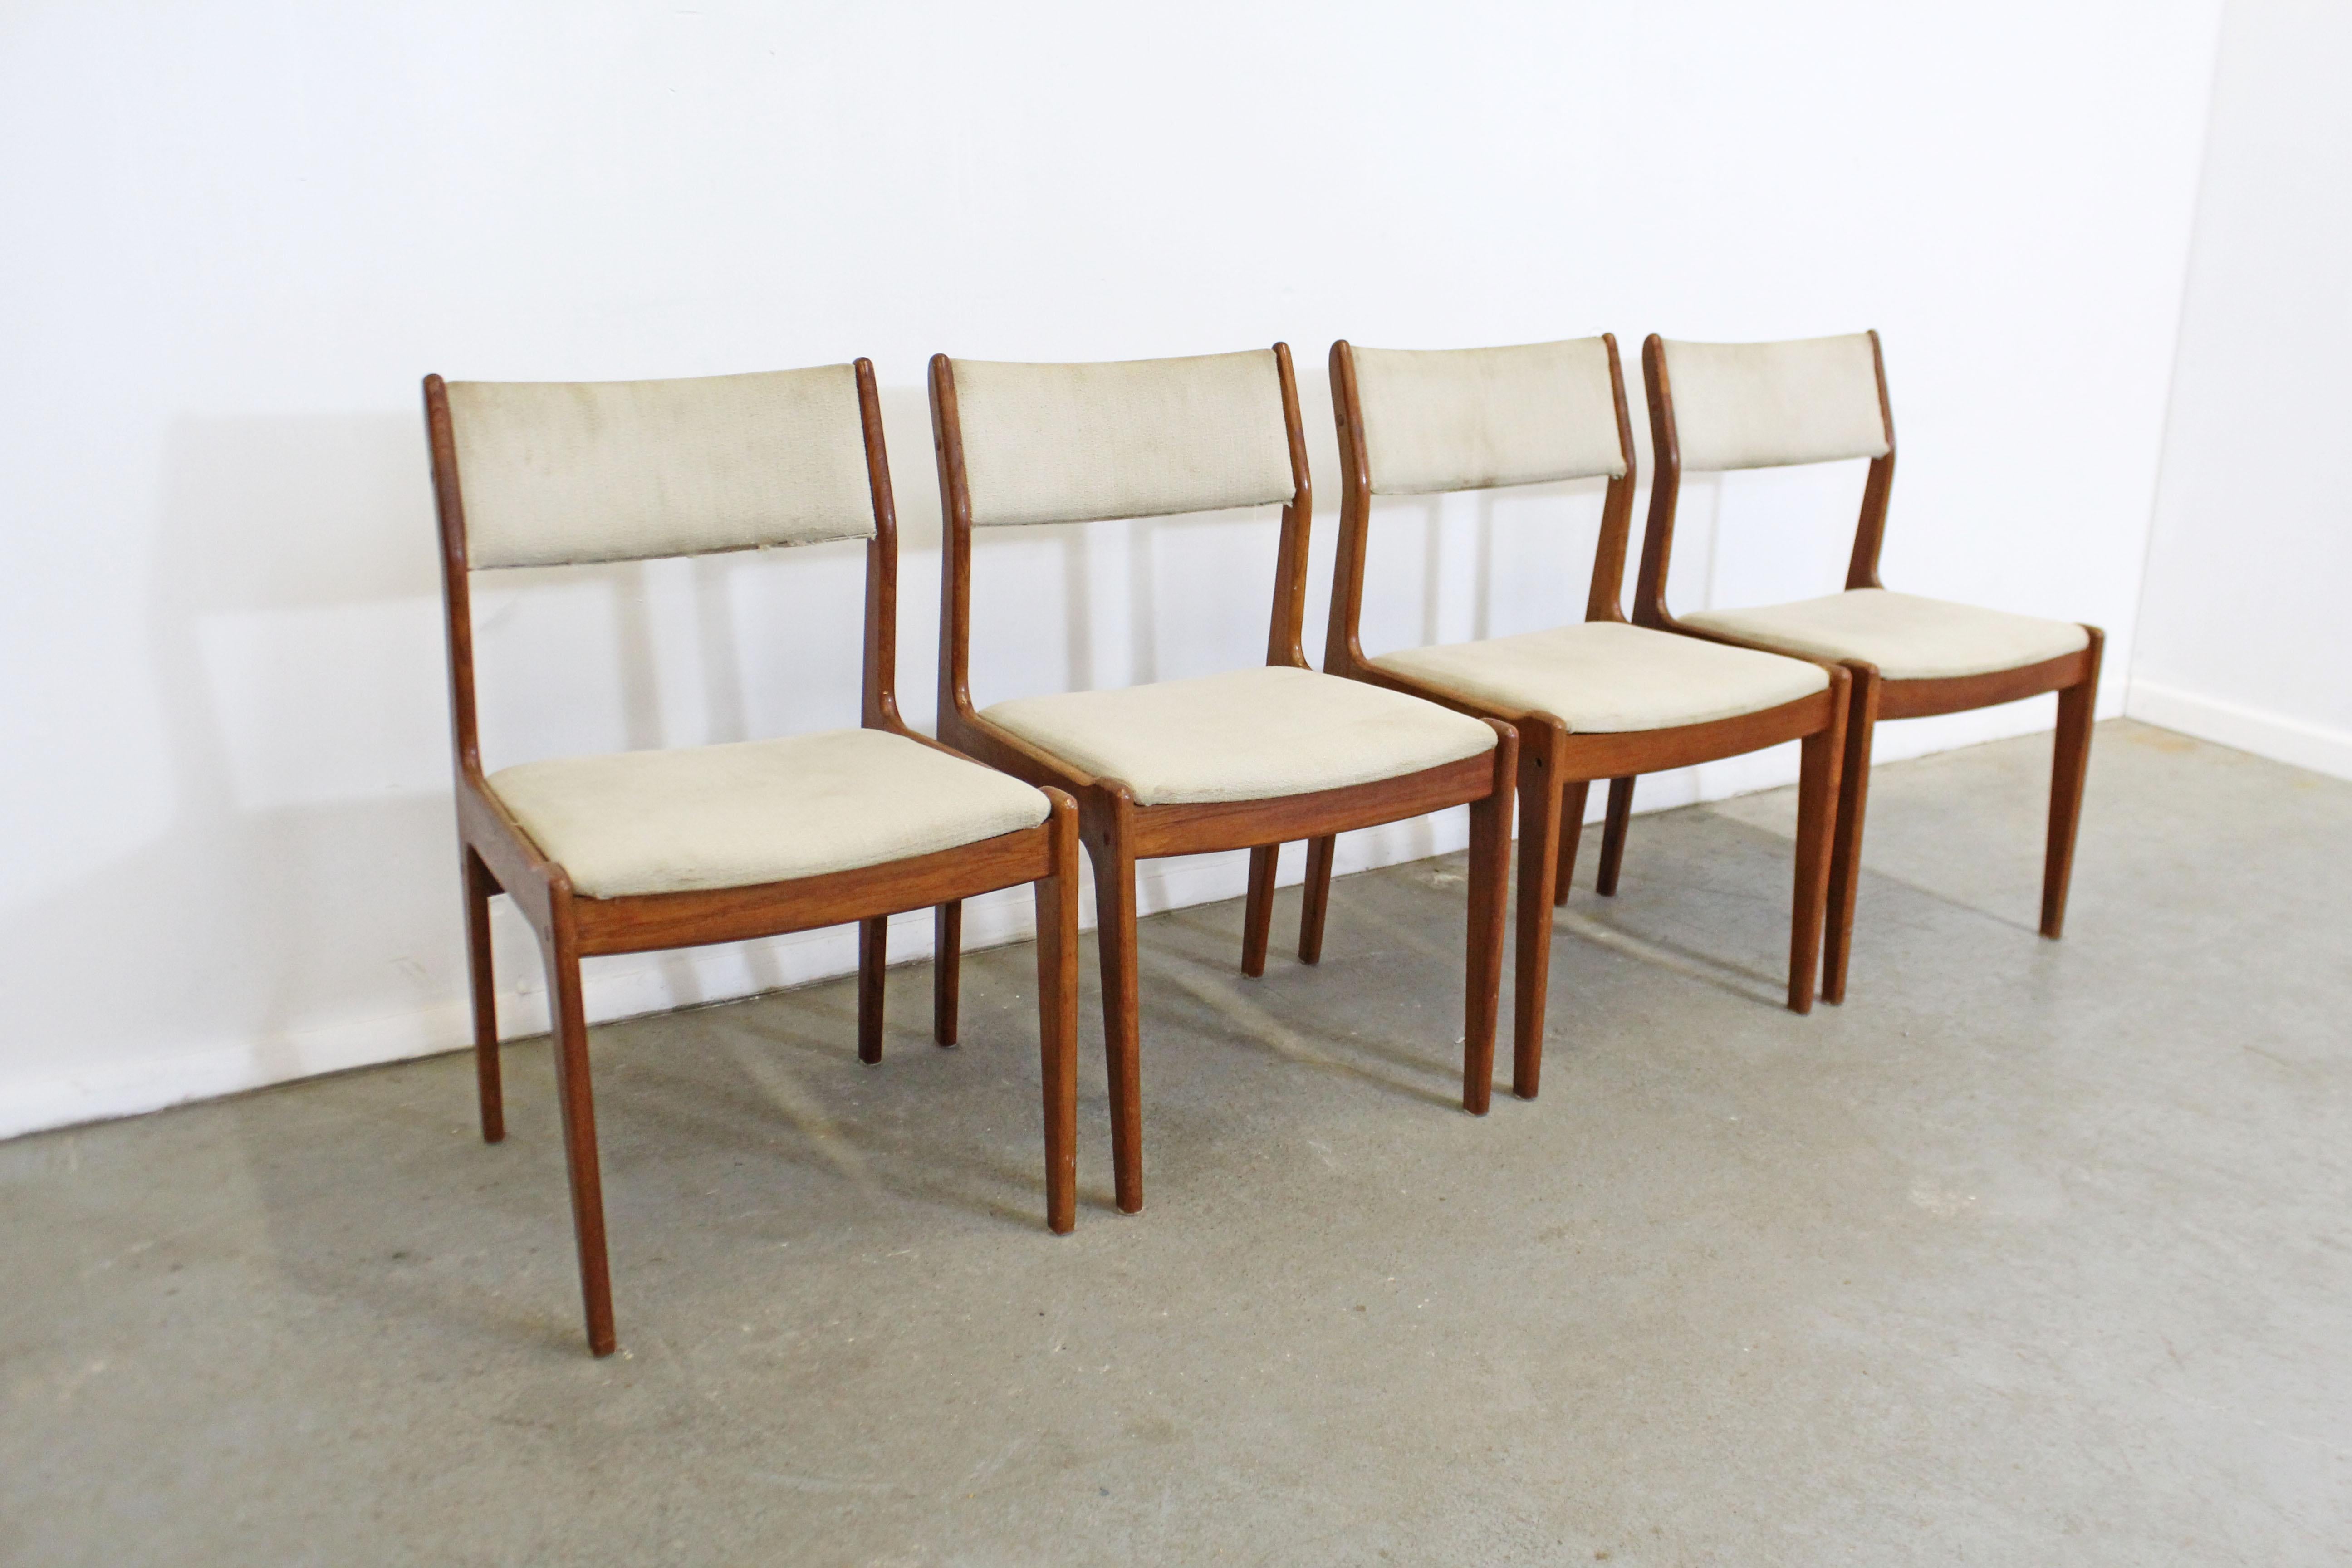 What a find. Offered is a vintage set of 4 Danish modern dining chairs made of teak. These chairs have sleek lines and have a lot of potential. They show obvious wear and need to be re-upholstered. They are not signed. 

Dimensions :
19.5